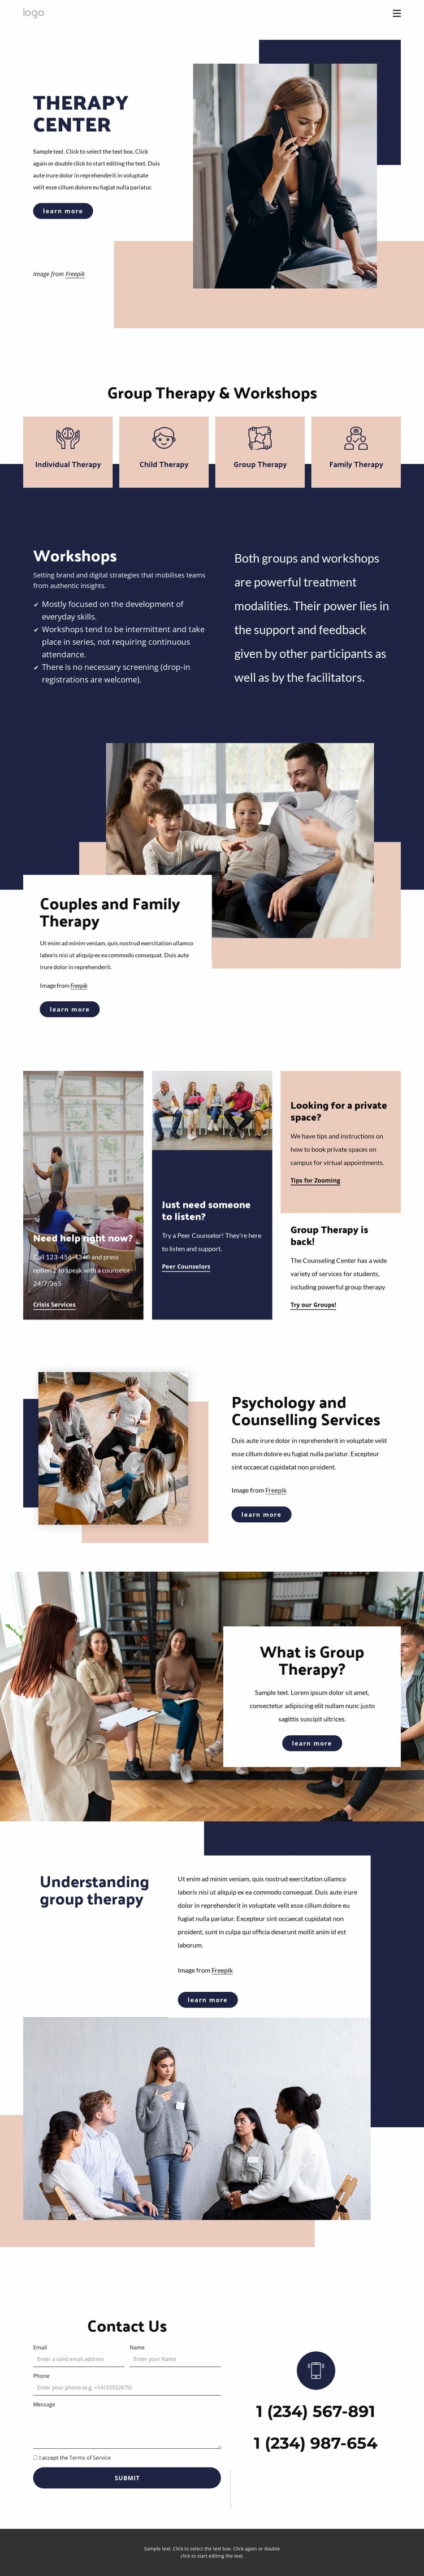 Therapy center Website Design